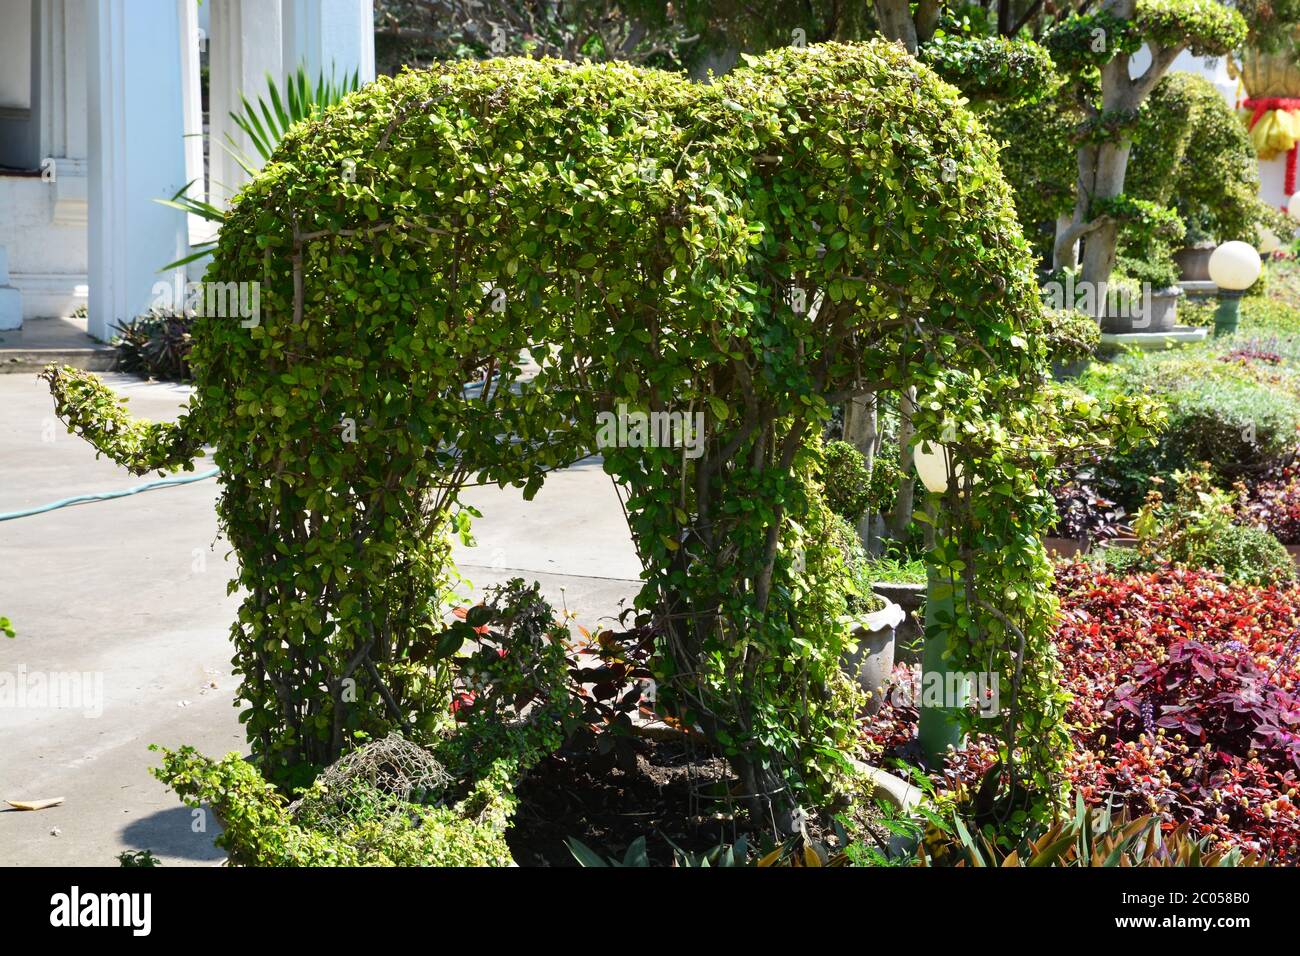 Topiary gardens. elephants created from bushes at green animals. landscape design. Grass figure of elephants, topiary figure Stock Photo